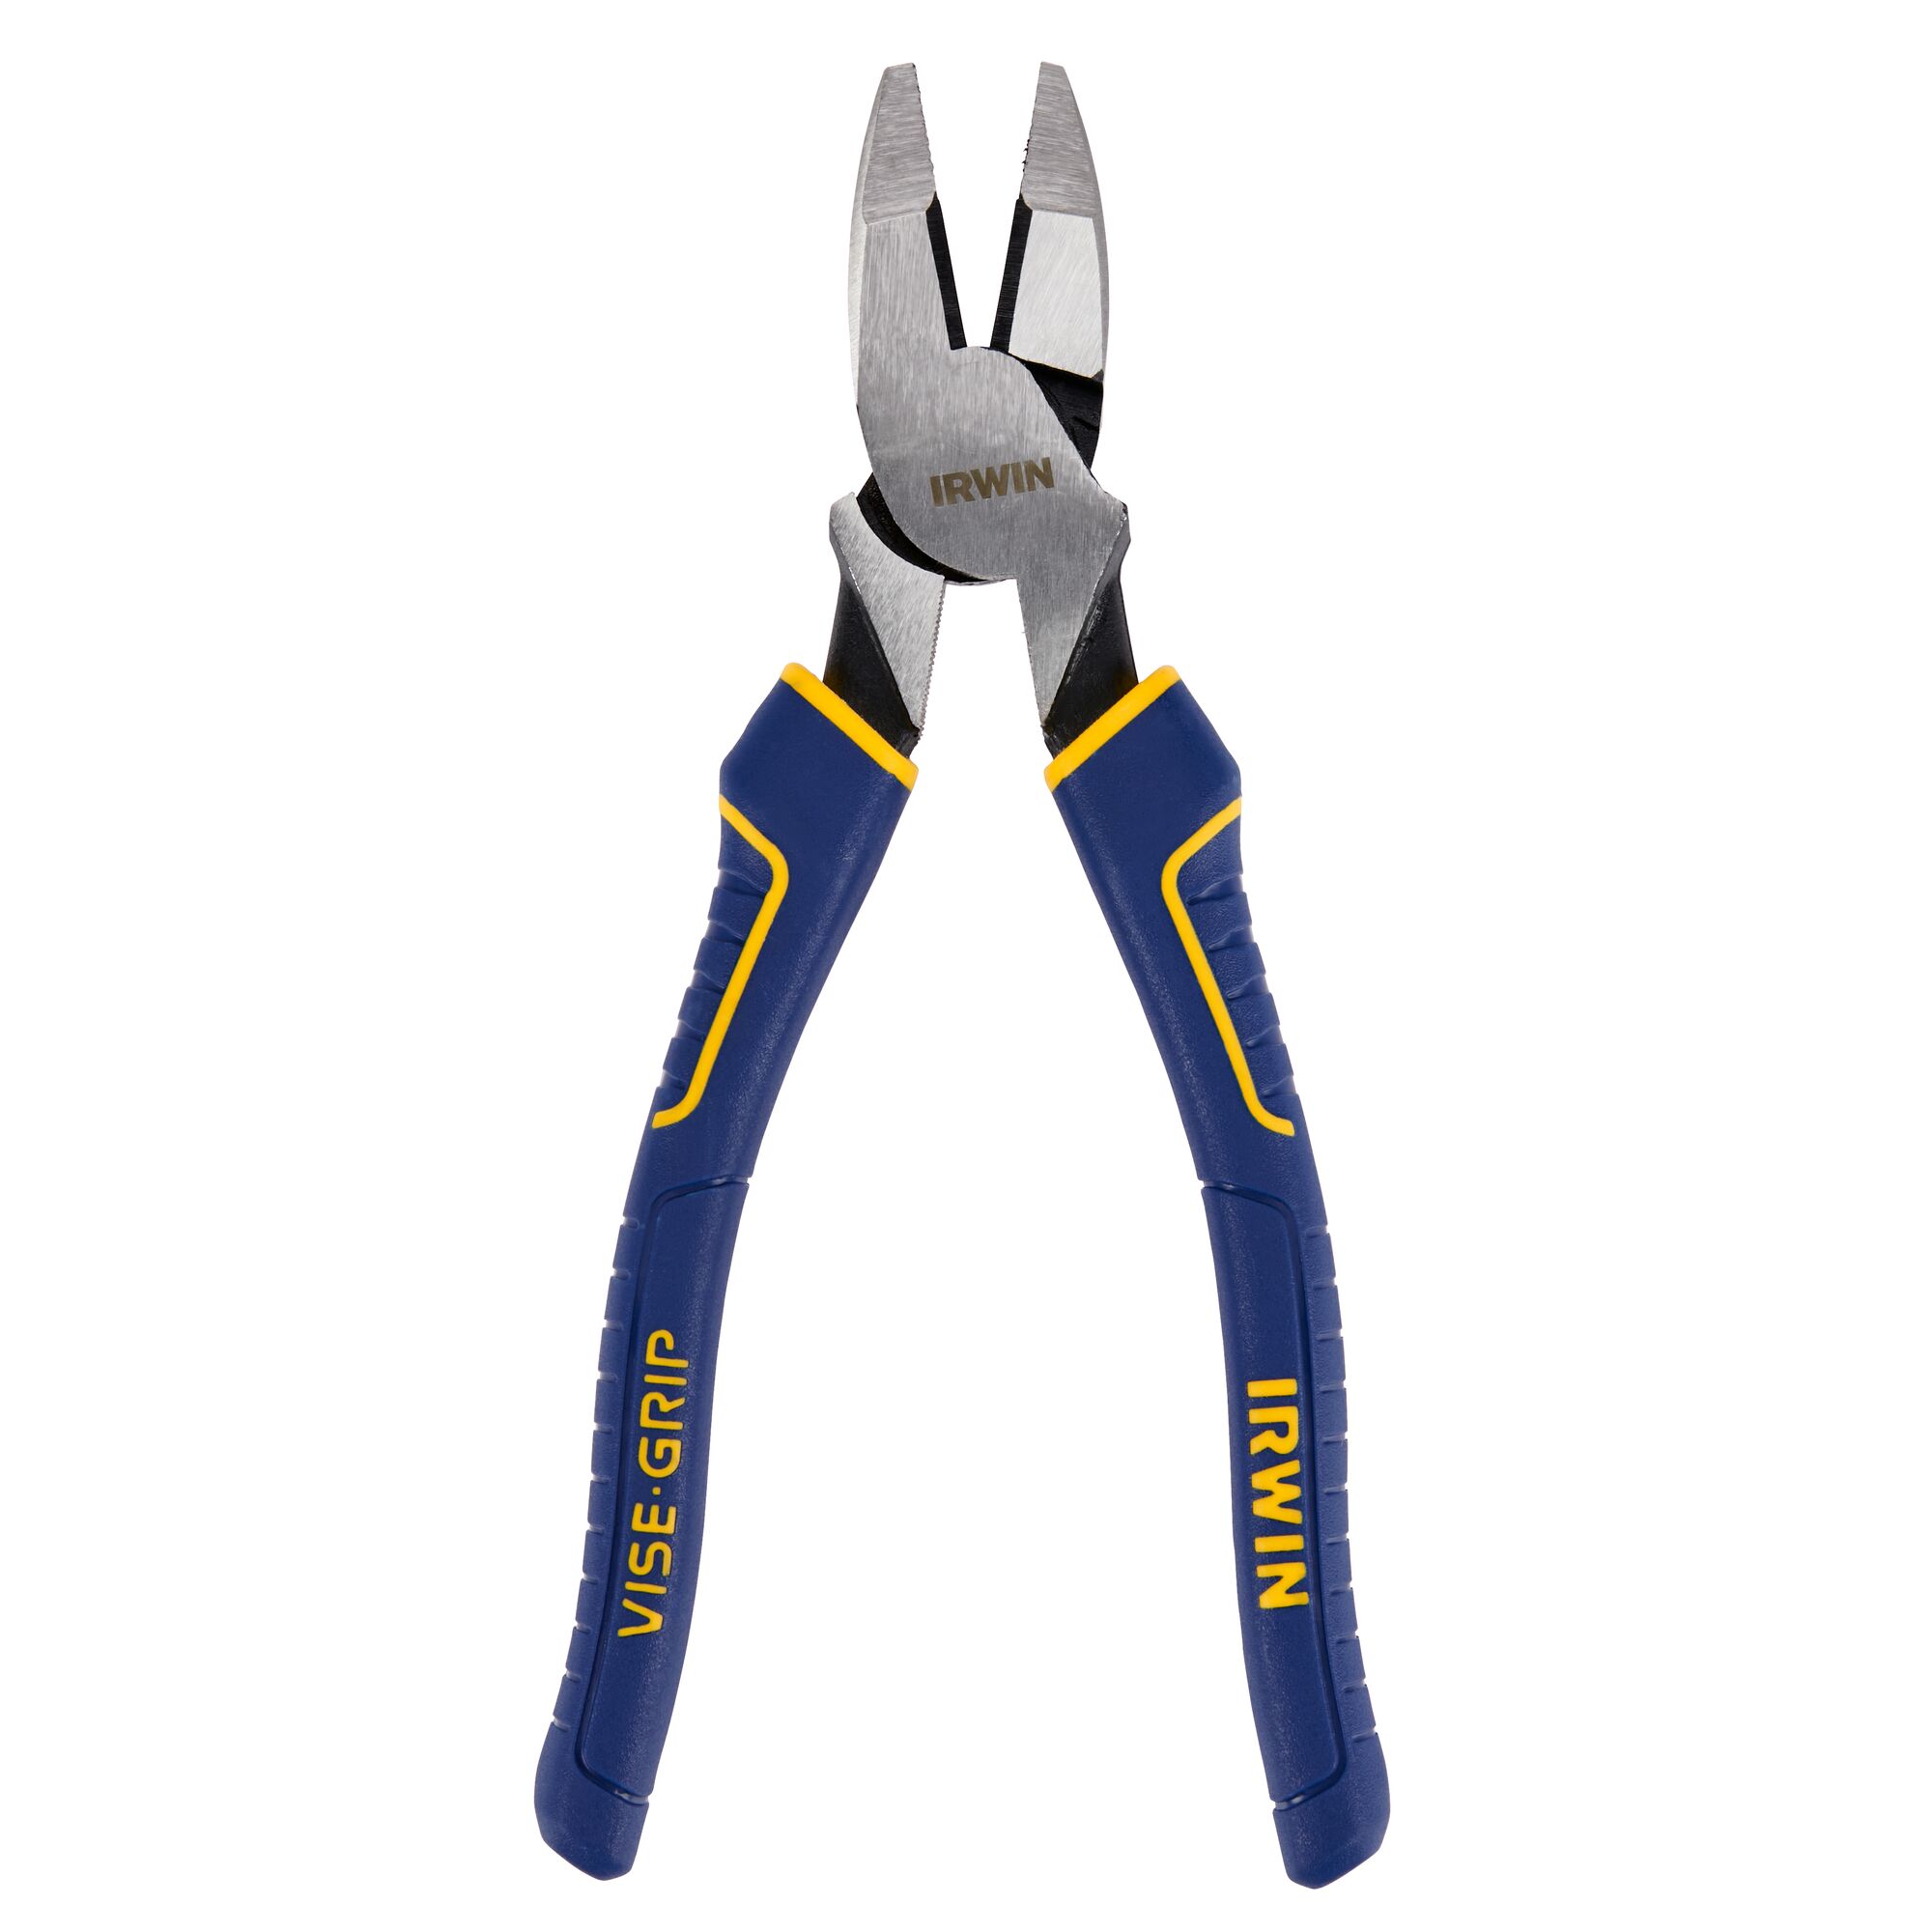 IRWIN VISE-GRIP Long Nose Pliers with Wire Cutter, 8-Inch (2078218)